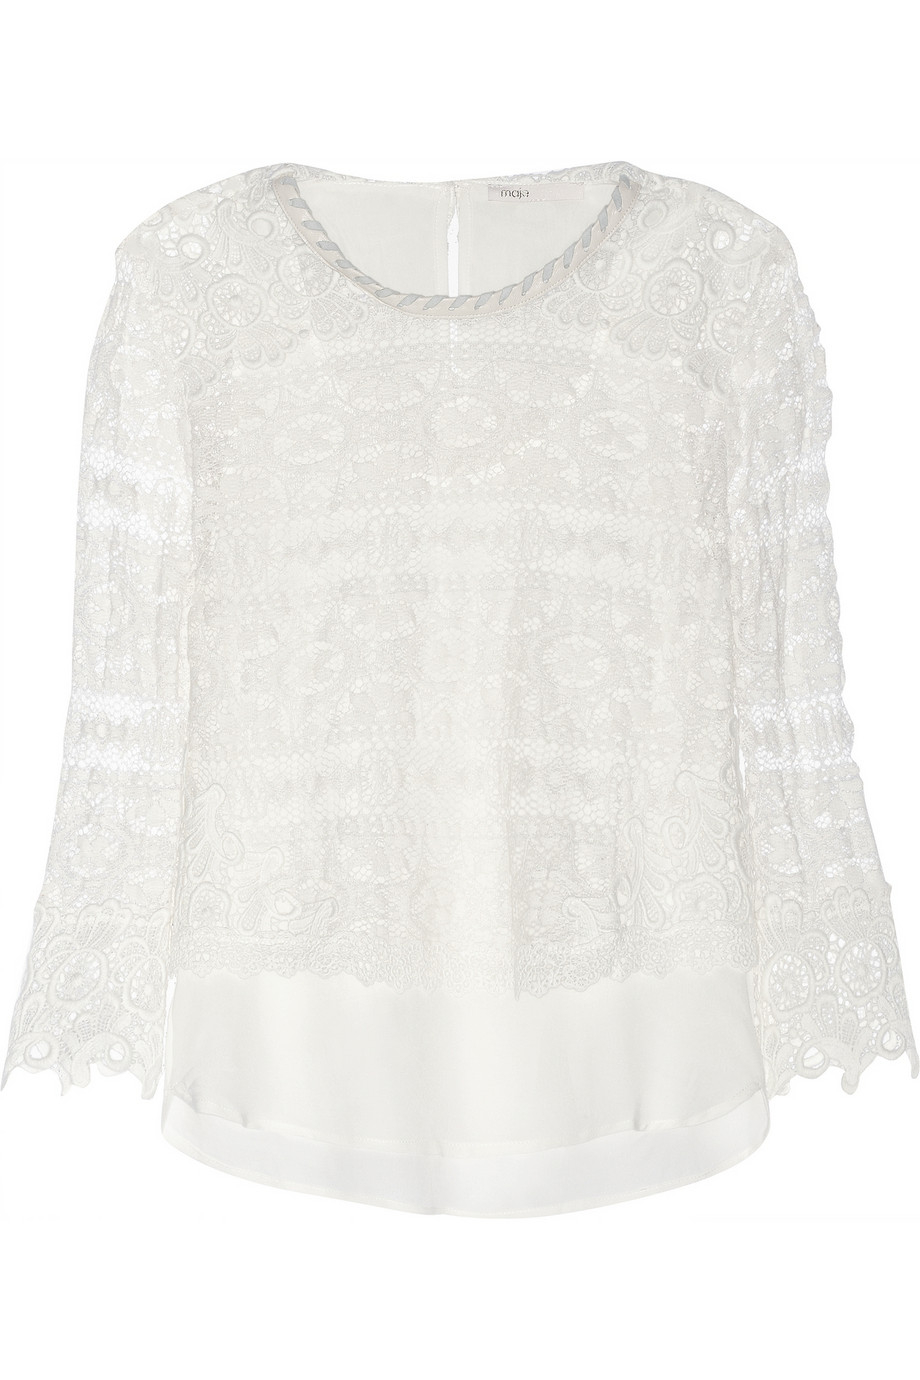 Lyst - Maje Eudiane Leathertrimmed Broderie Anglaise and Lace Top in White